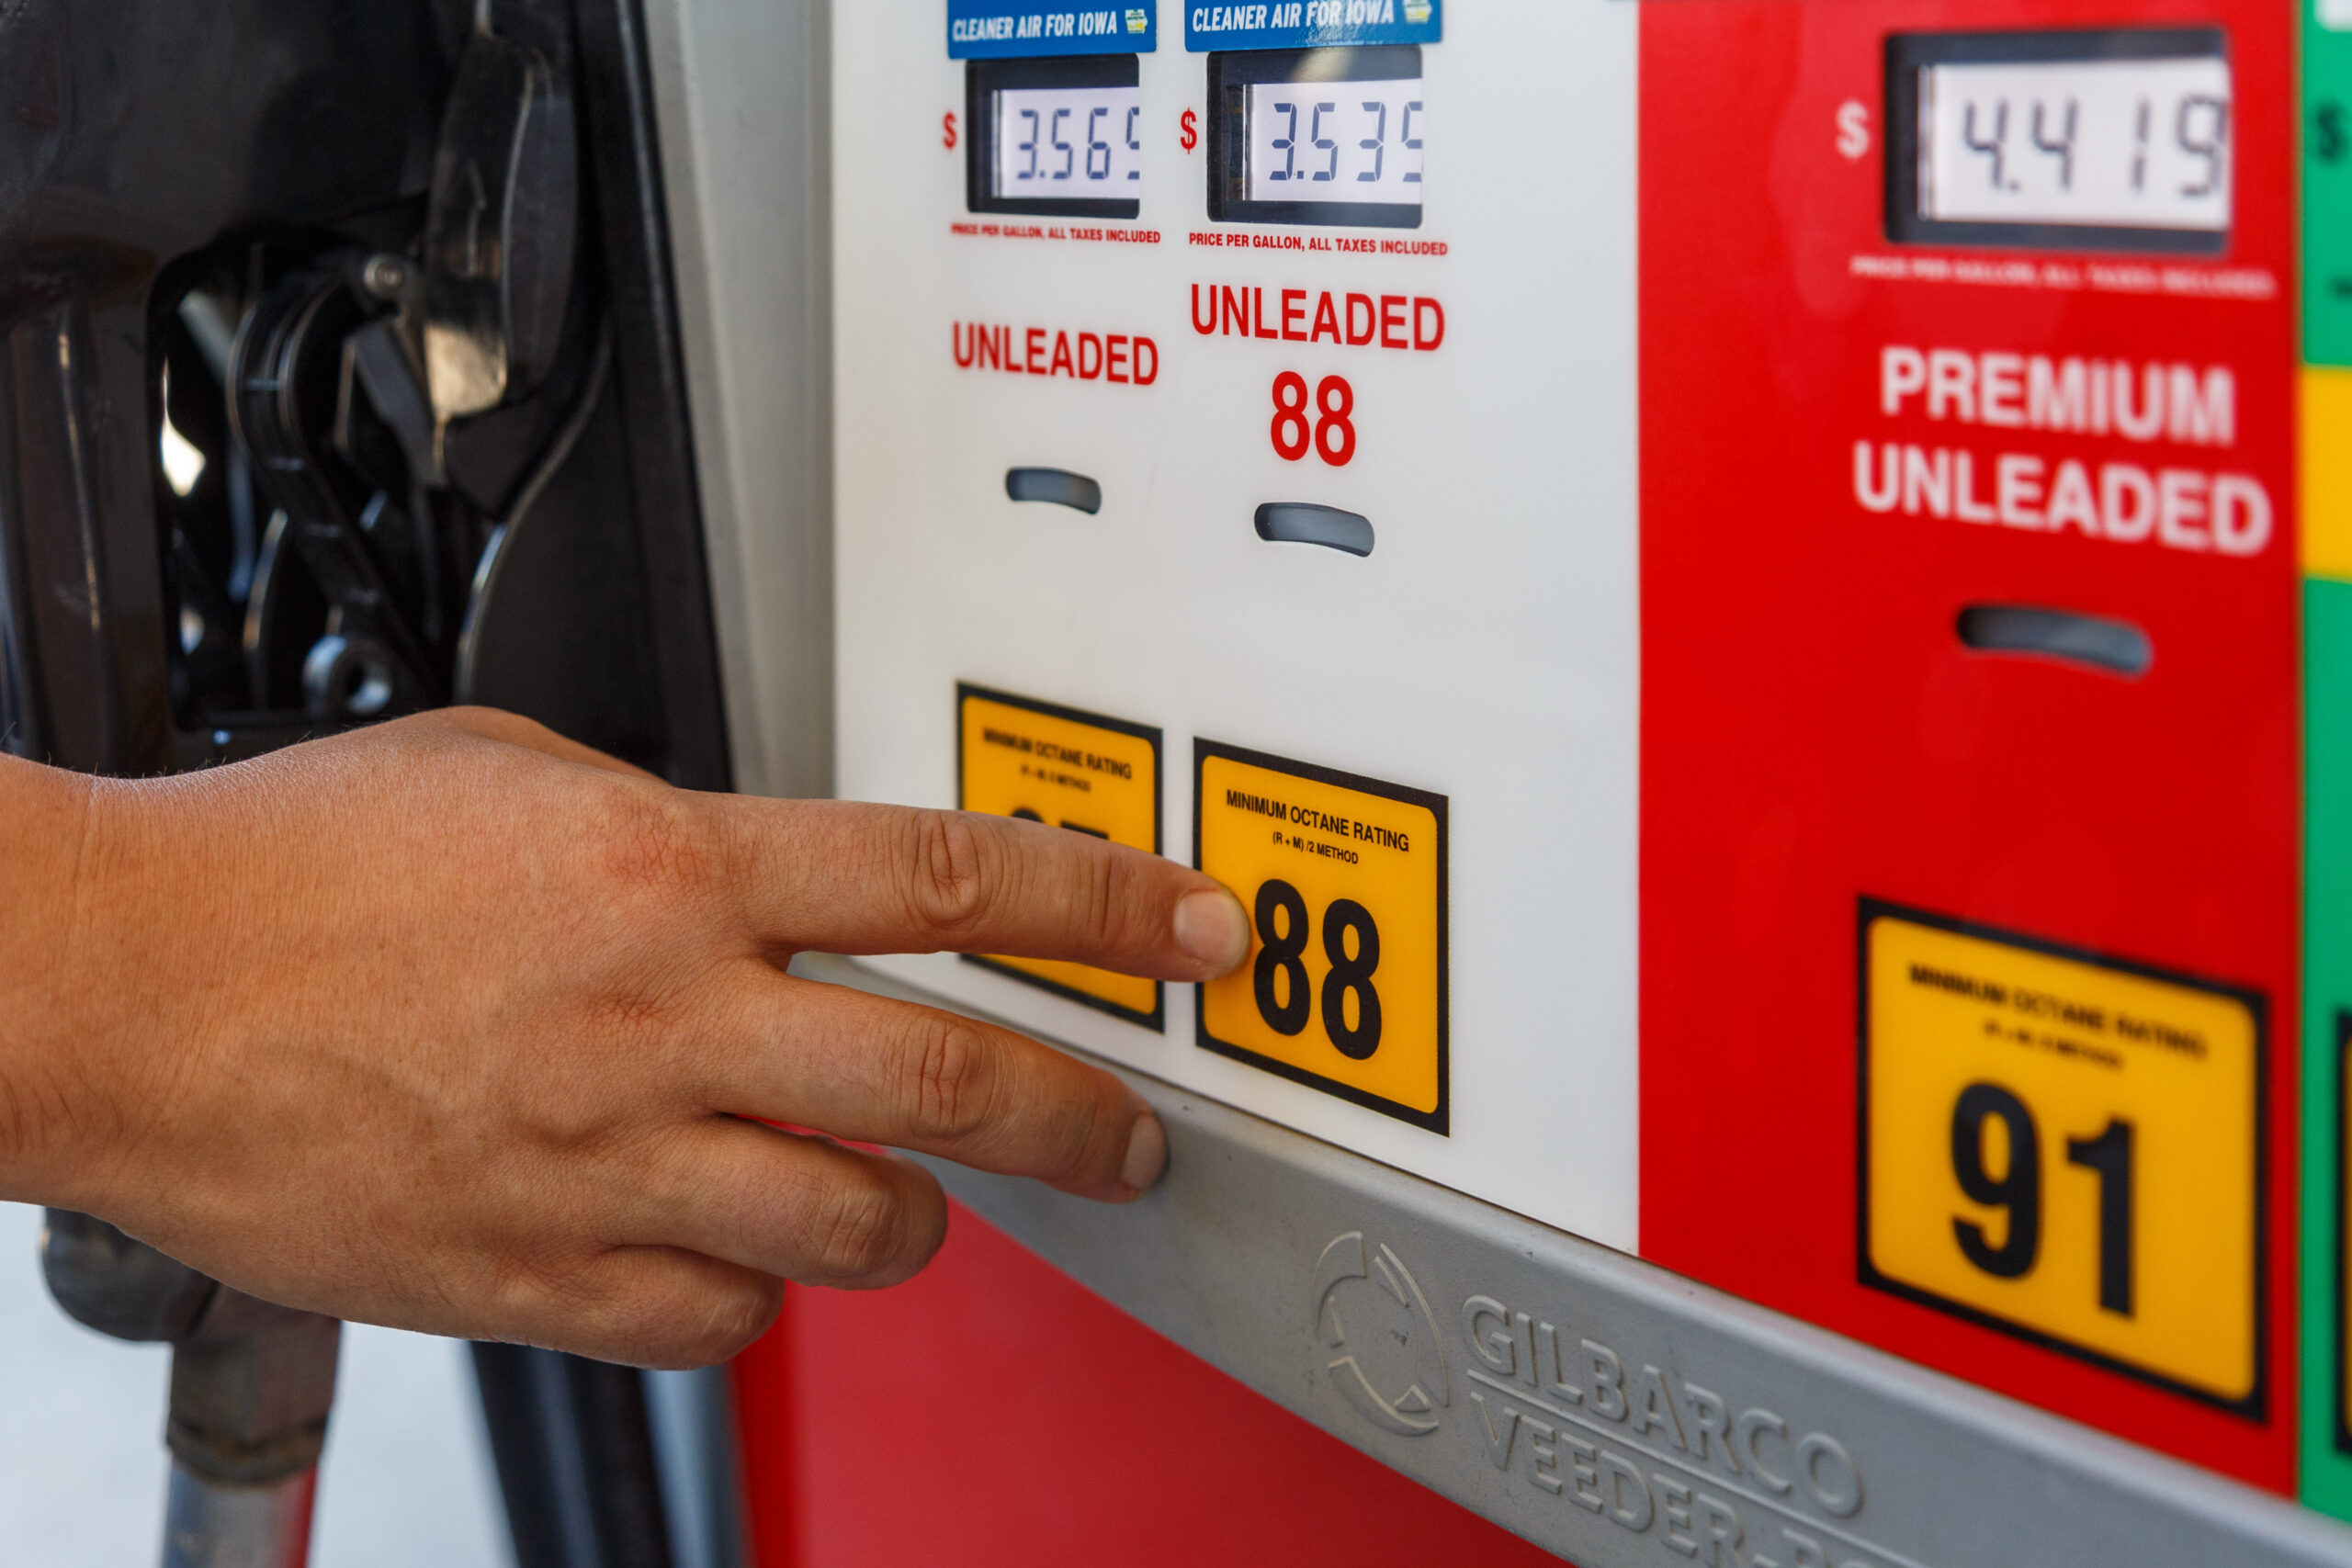 EPA announced it would grant an emergency waiver to allow the sale of E15 this summer.